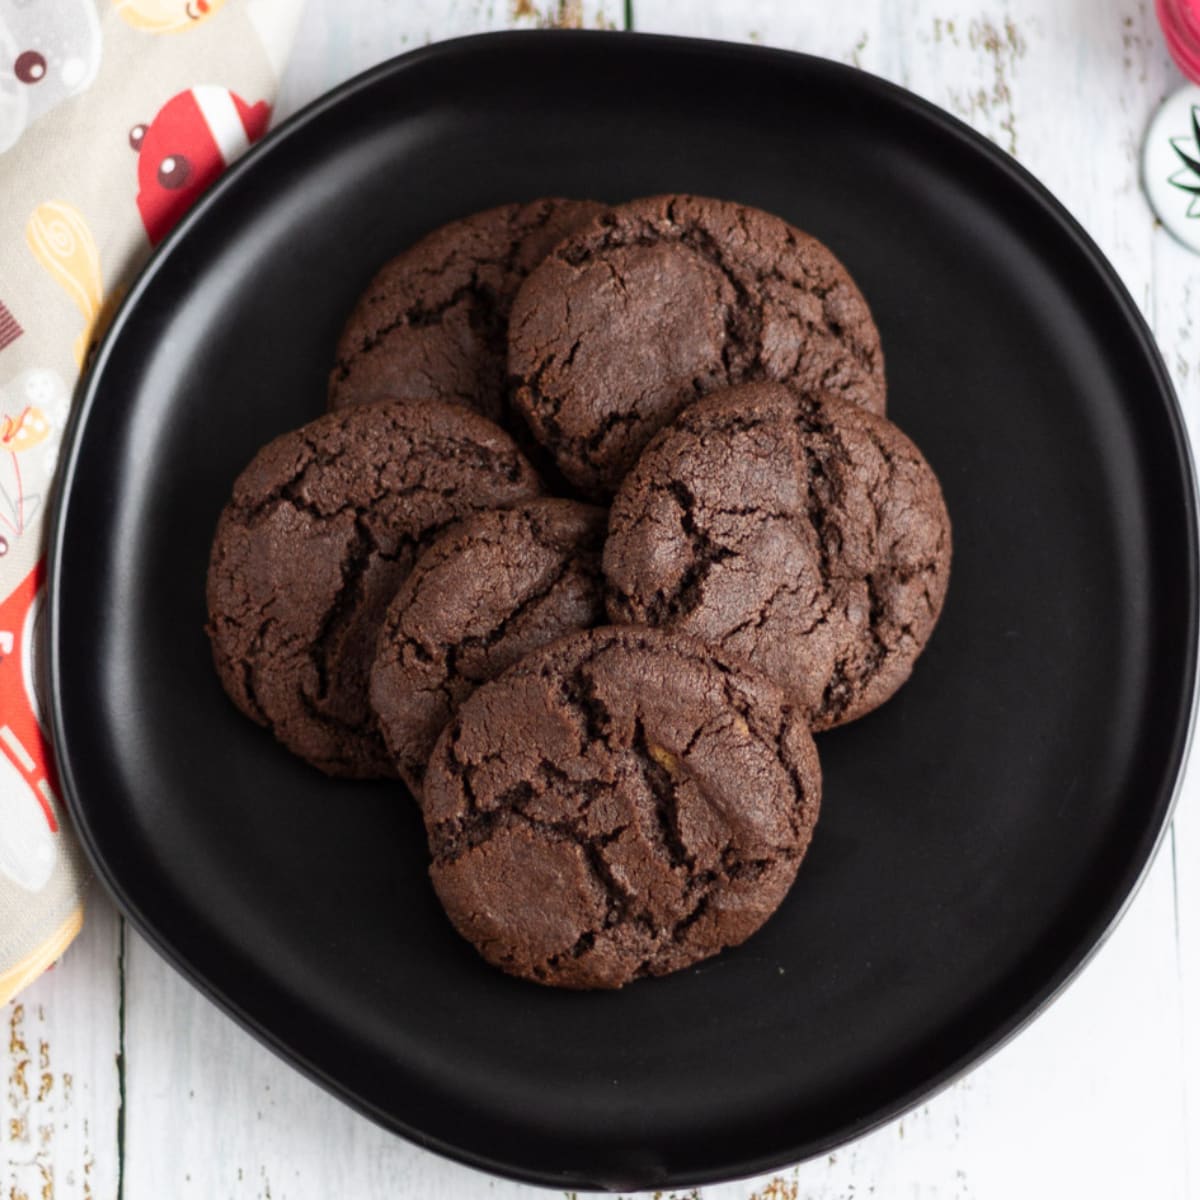 Six chocolate cookies on a black plate